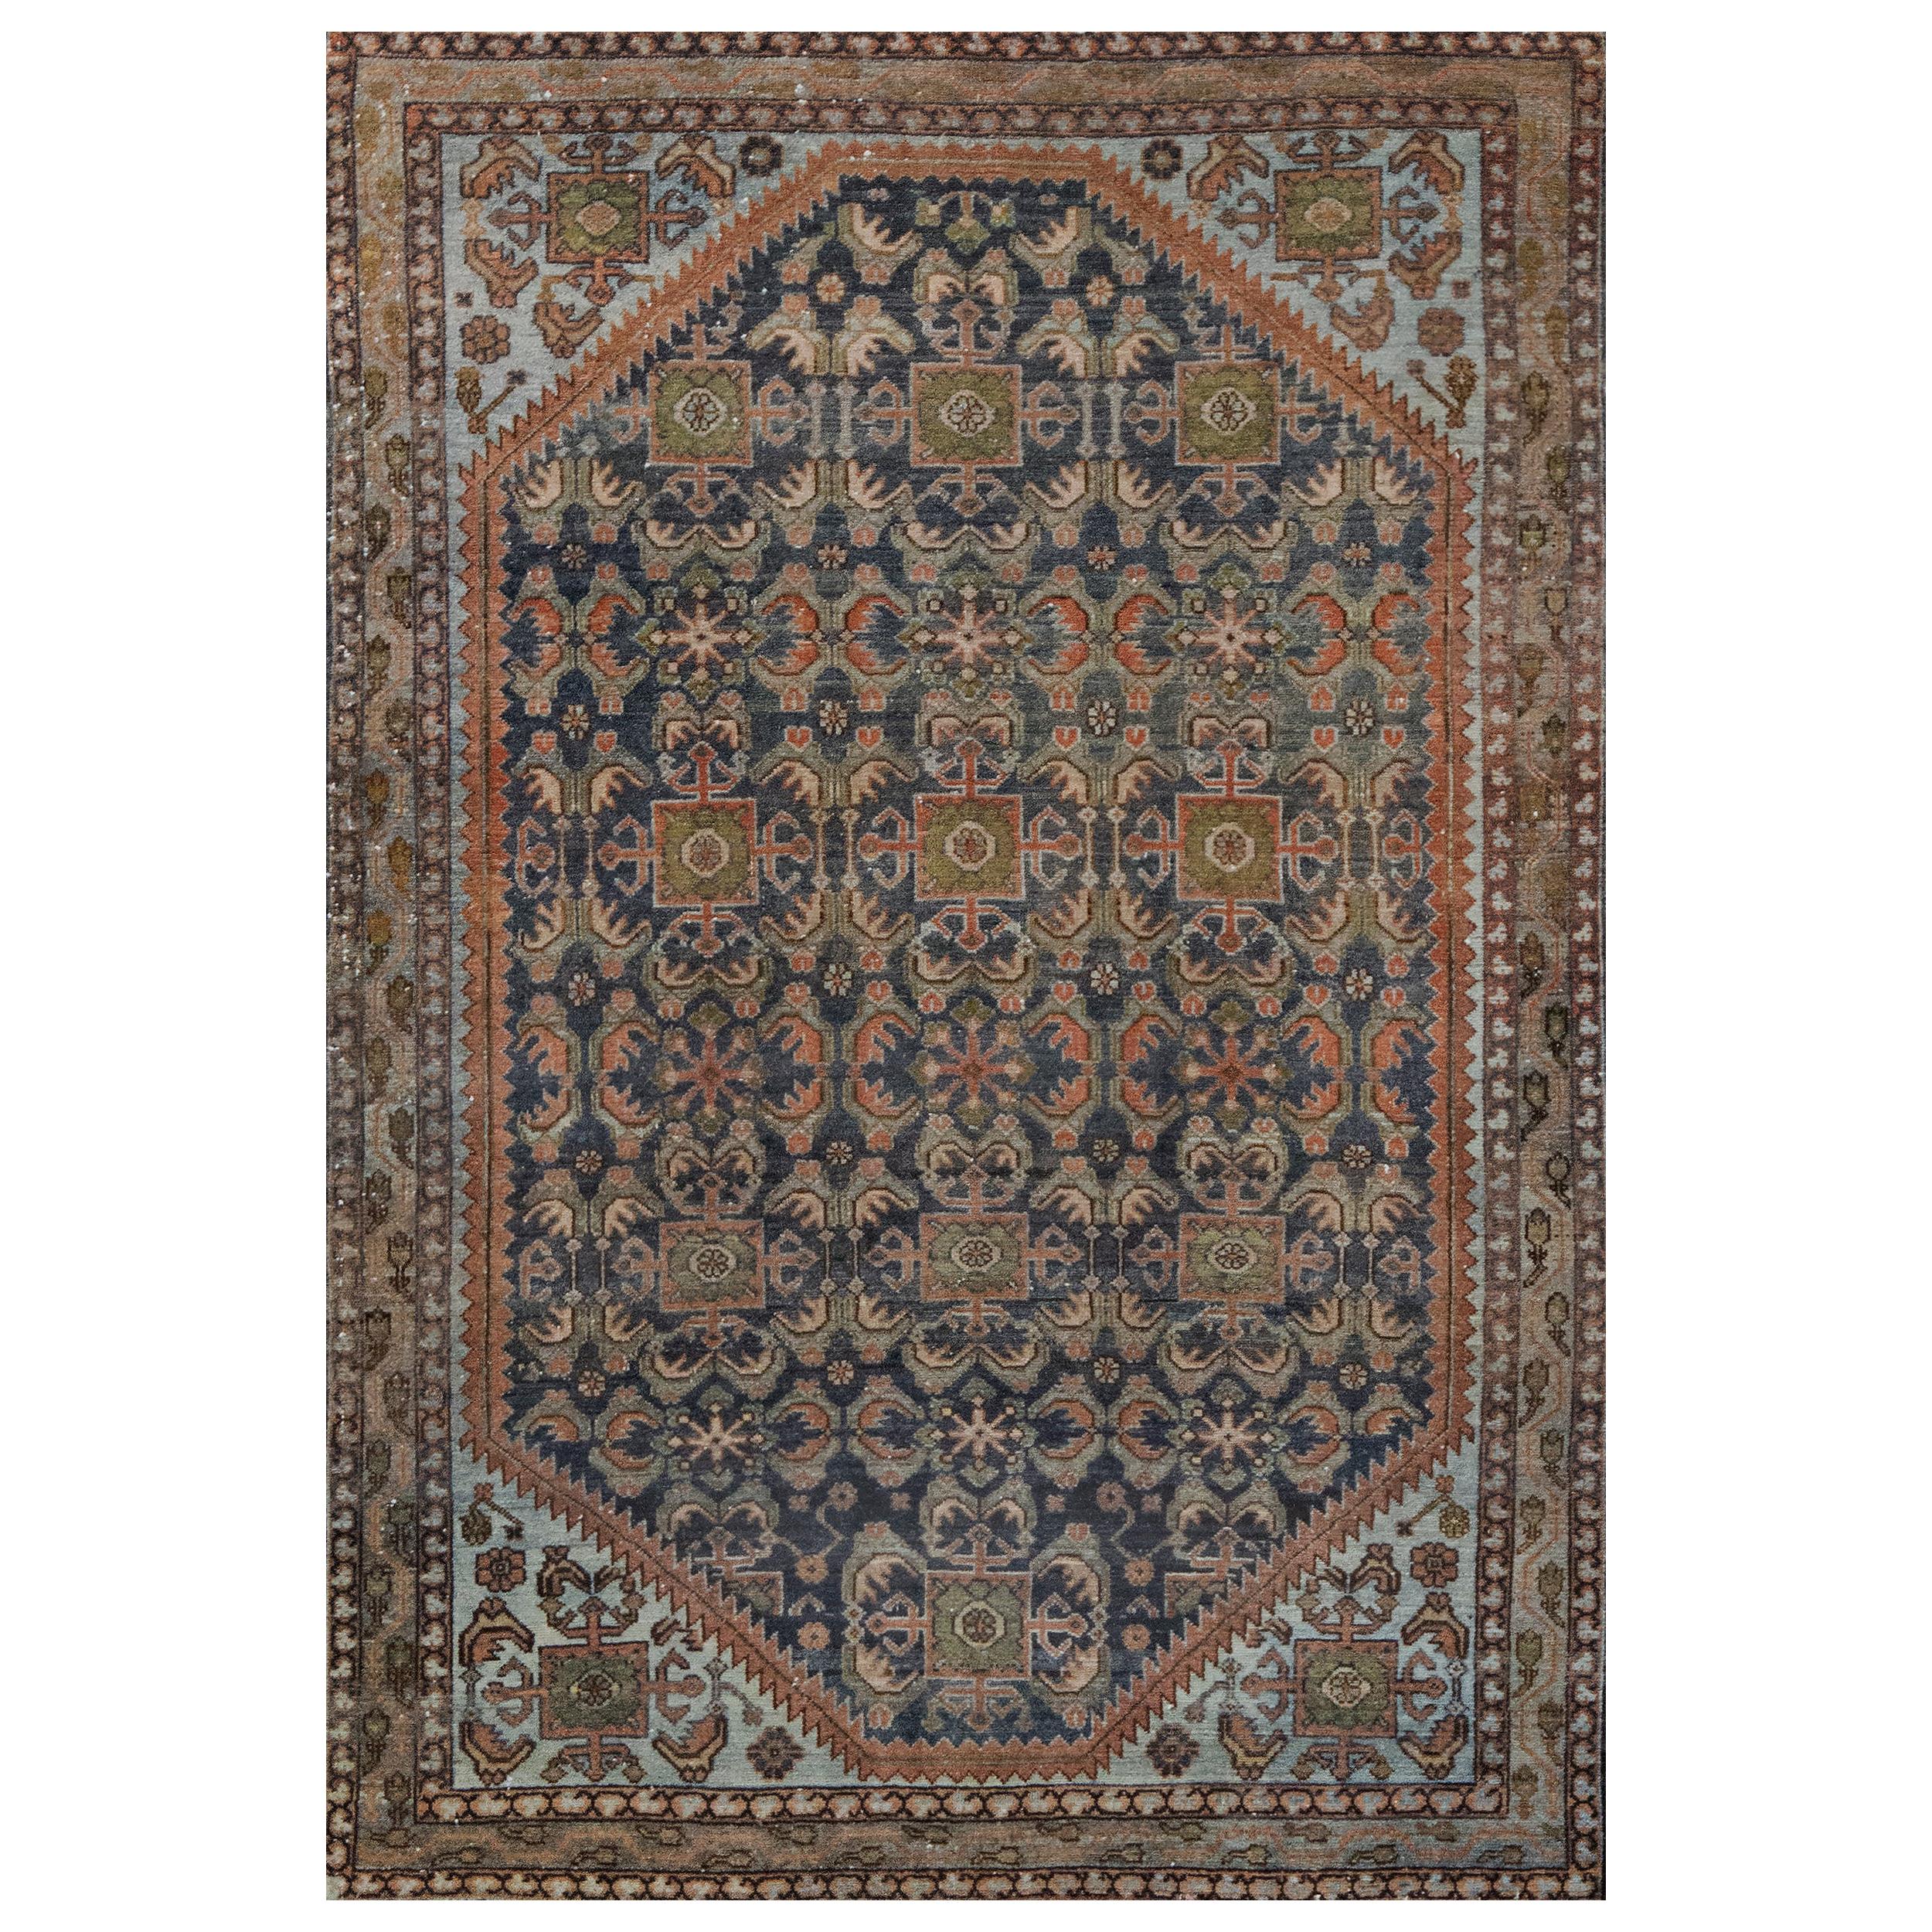 Wool Handwoven Persian Malayer Rug from the Late 19th Century